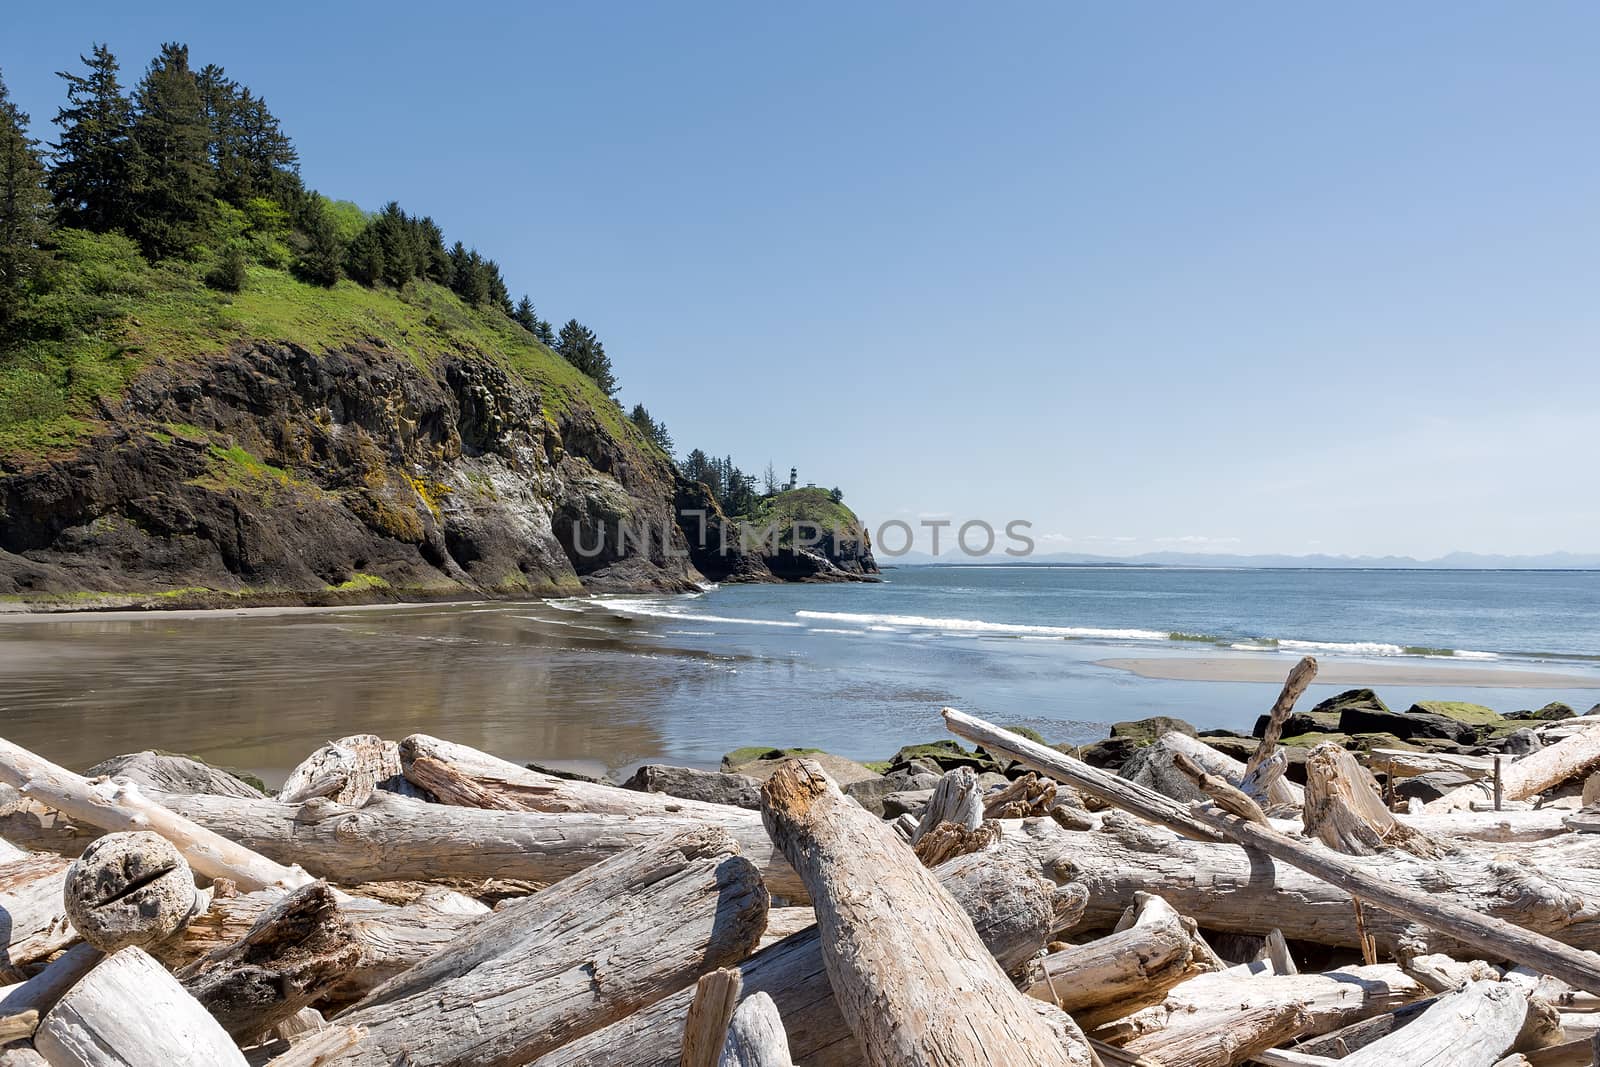 Driftwood at Waikiki Beach by Lighthouse at Cape Disappointment State Park in Washington State